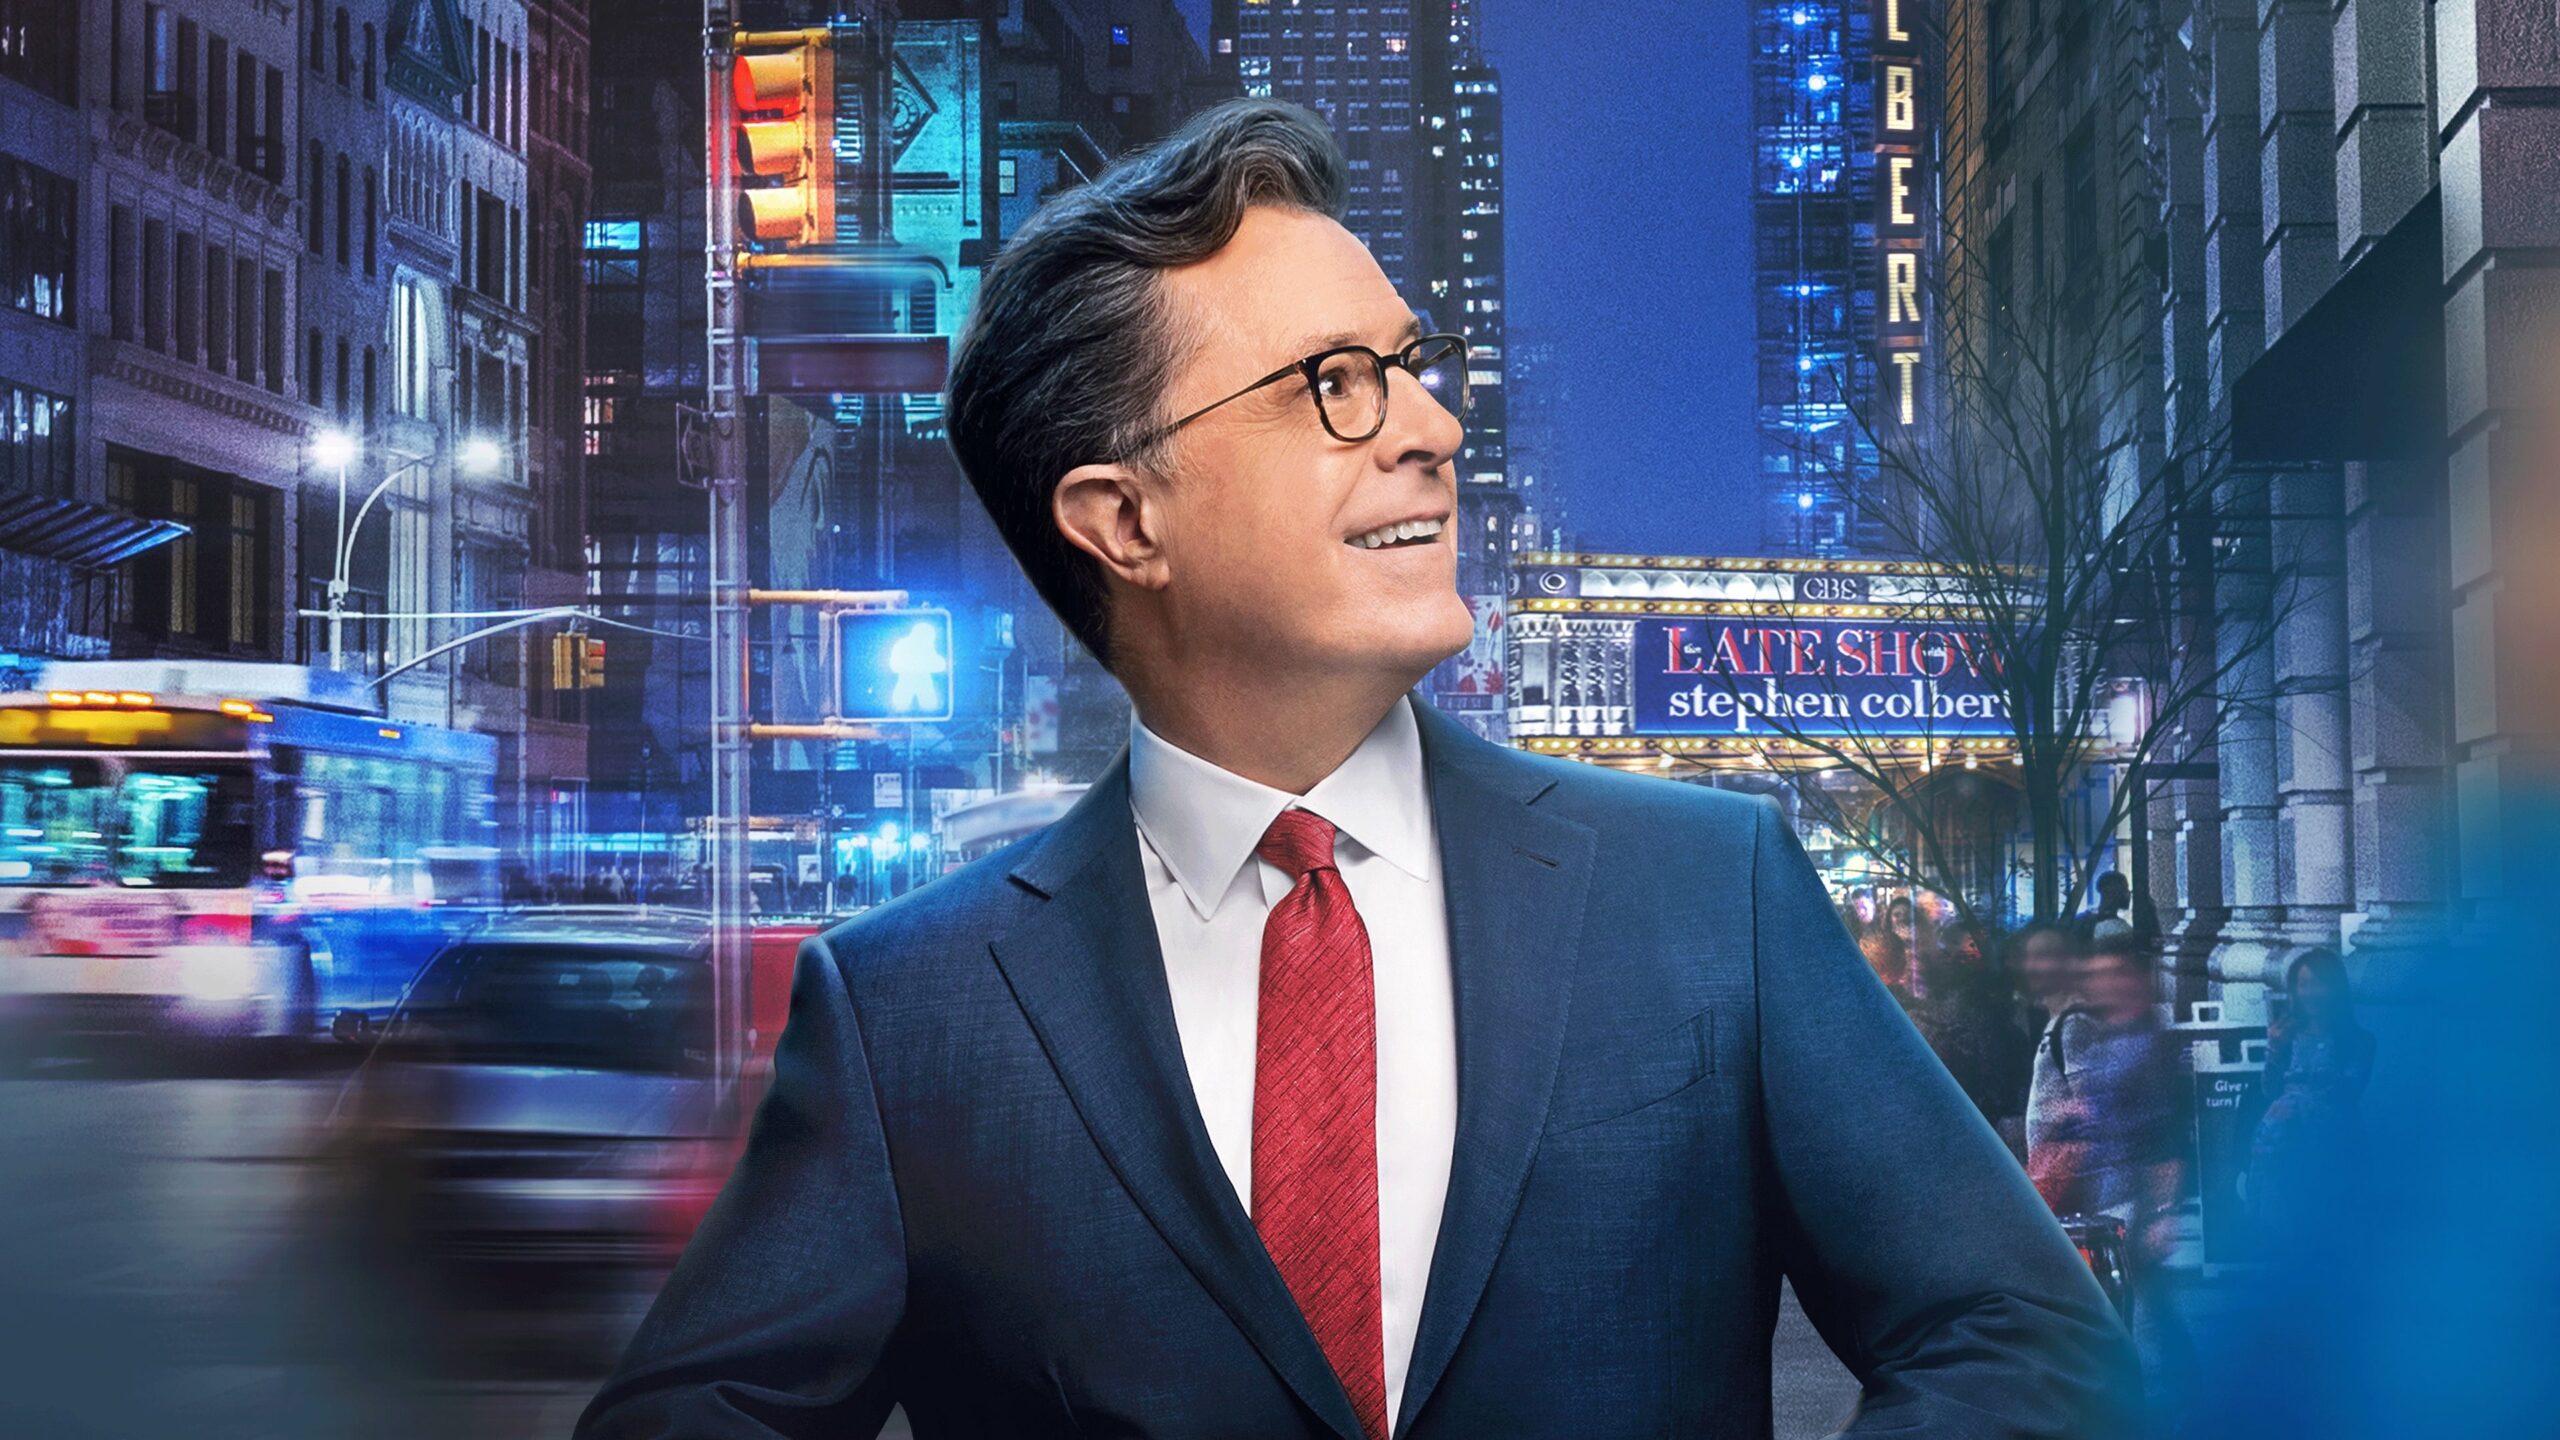 The Late Show with Stephen Colbert season 9